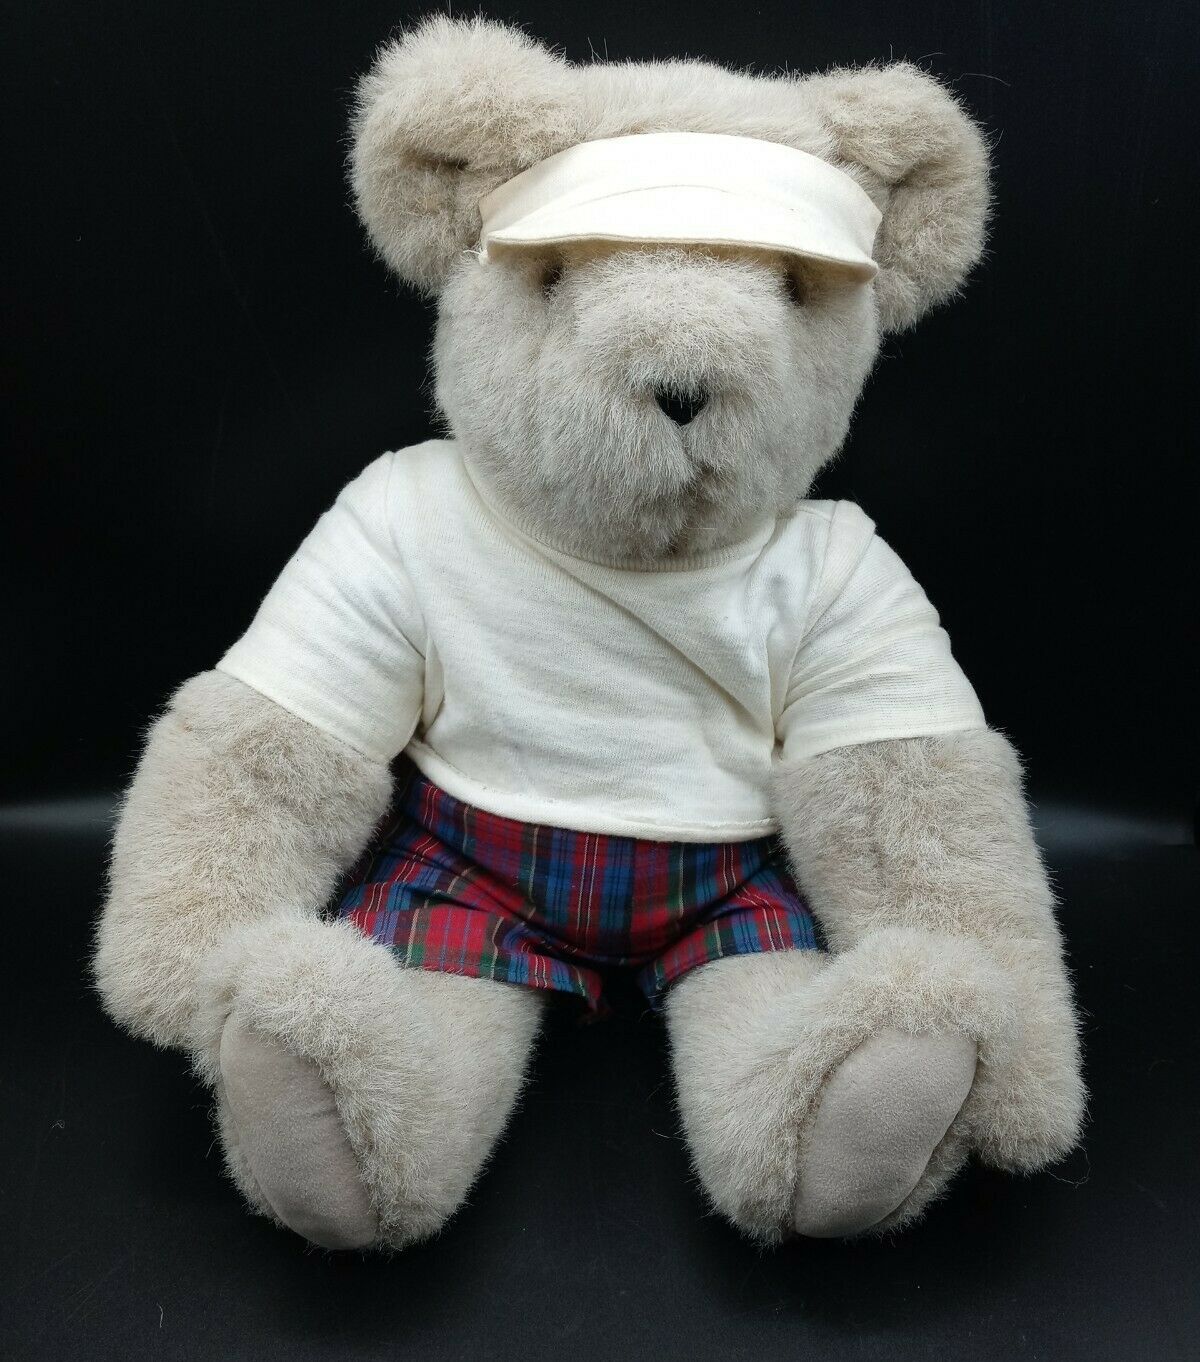 Vintage 1992 The Vermont Teddy Bear Company 17" Bear W/ Original Tennis Outfit